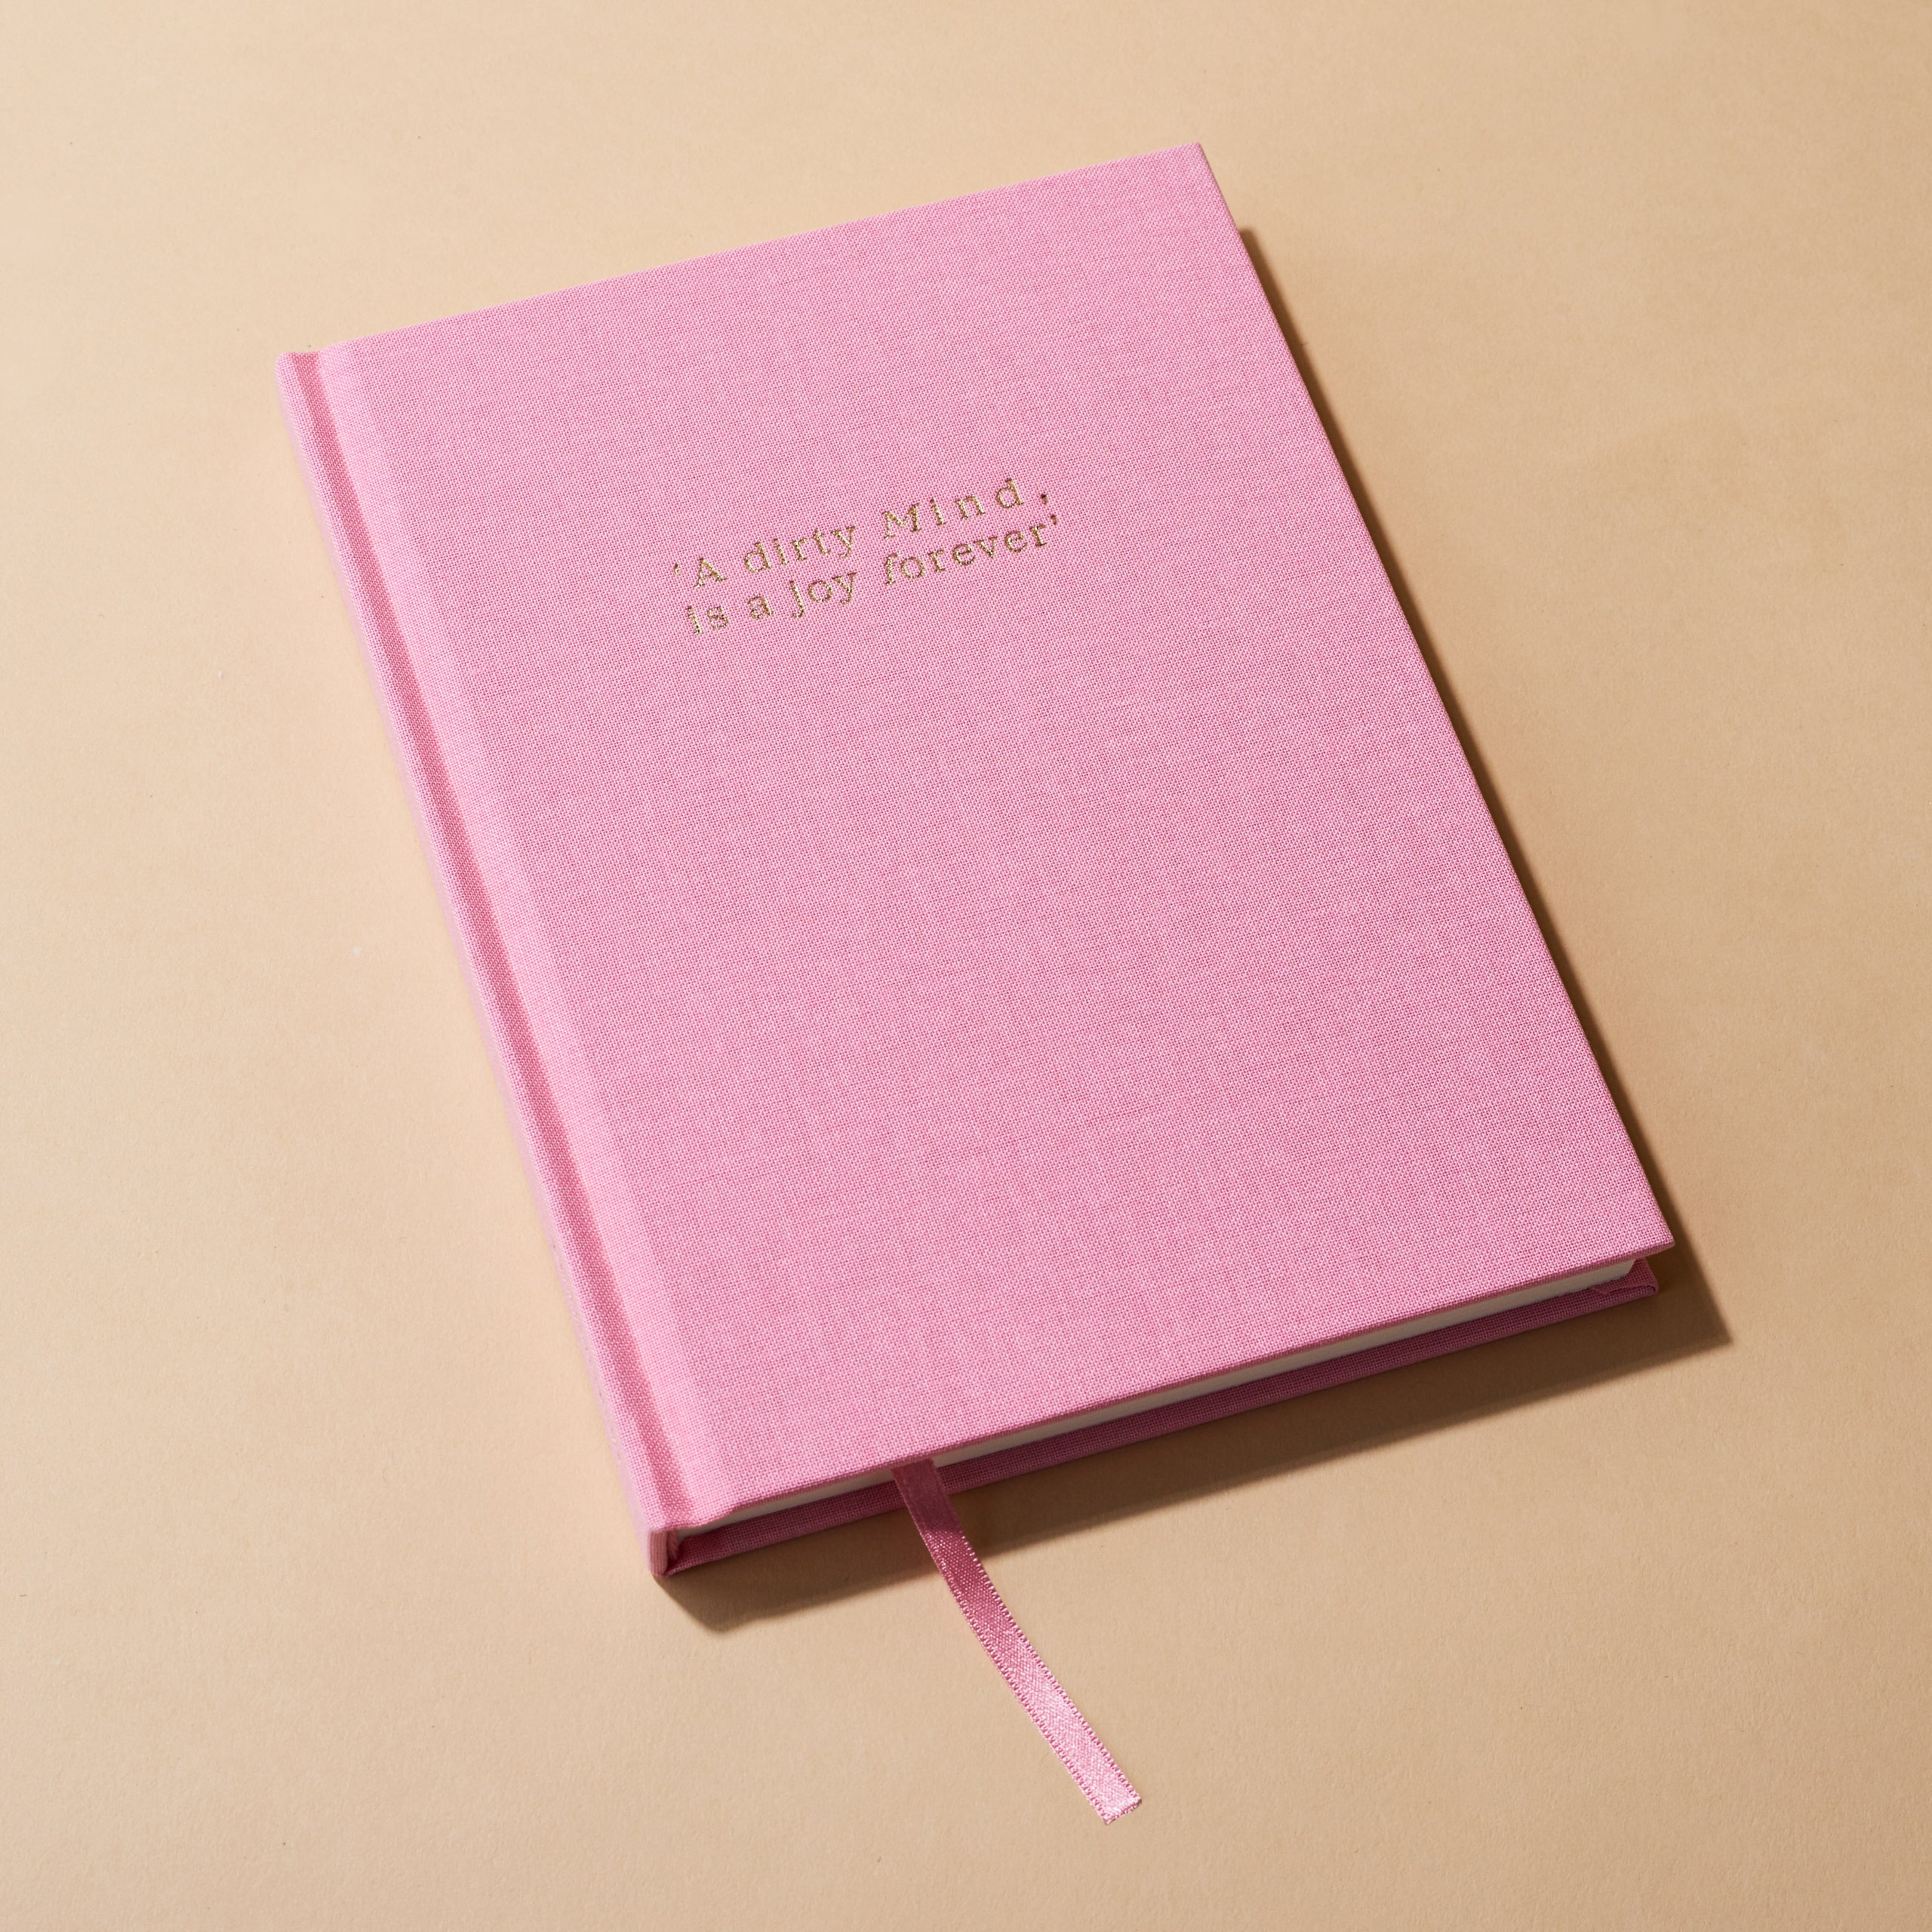 Luxury Notebooks - 'A dirty mind is a joy forever'